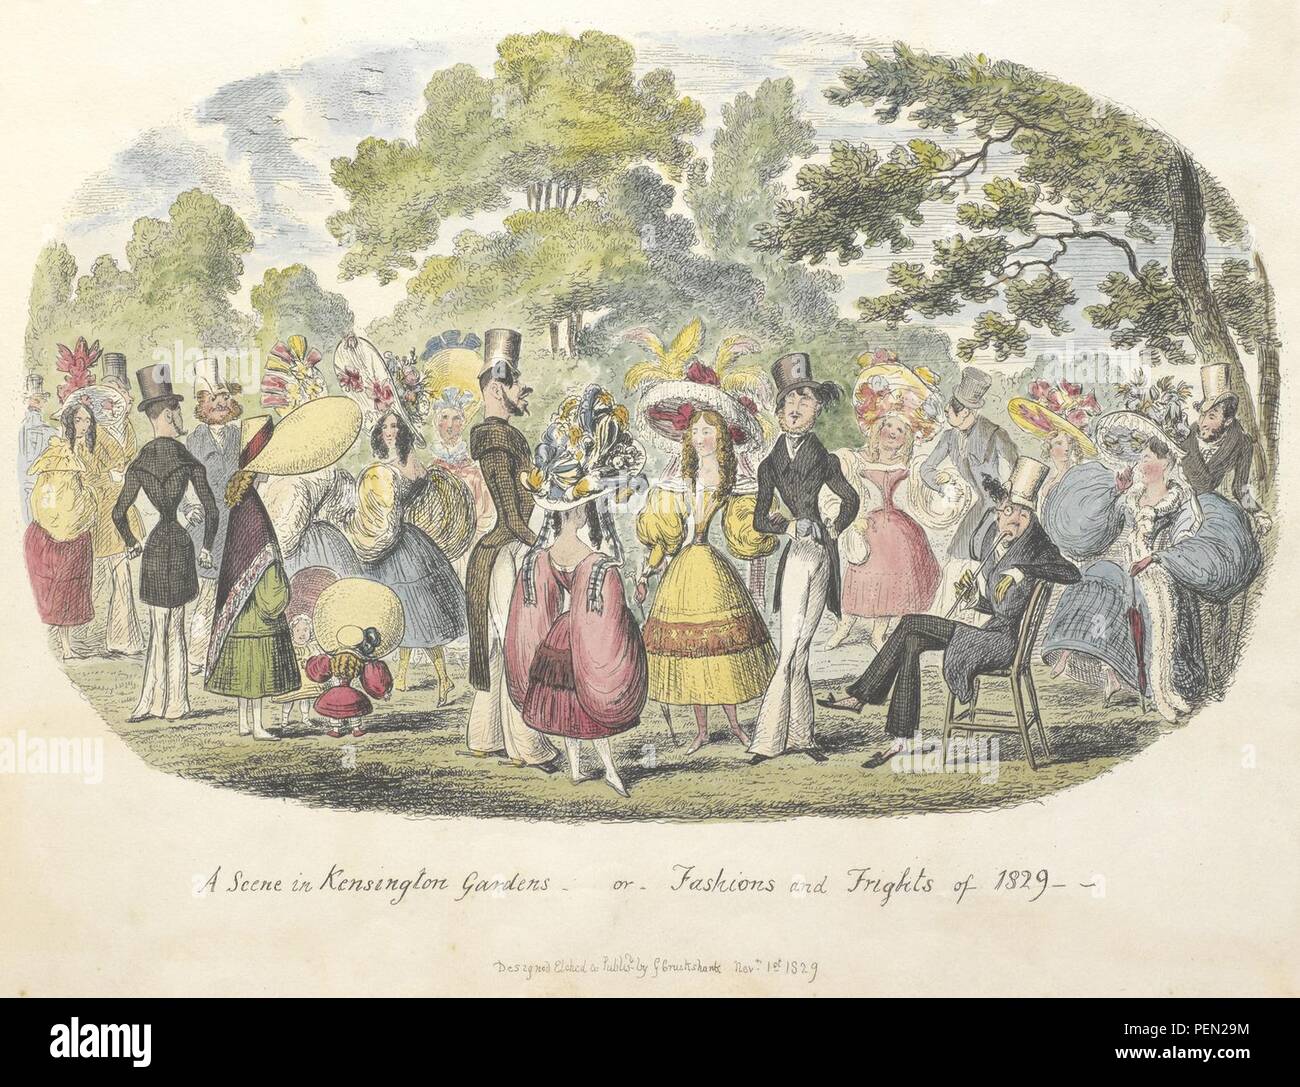 Scraps and sketches, etc. - caption  ''A scene in Kensington Gardens, or fashion and frights of 1829'. An amusing sketch showing people dressed up, in the park.' Stock Photo